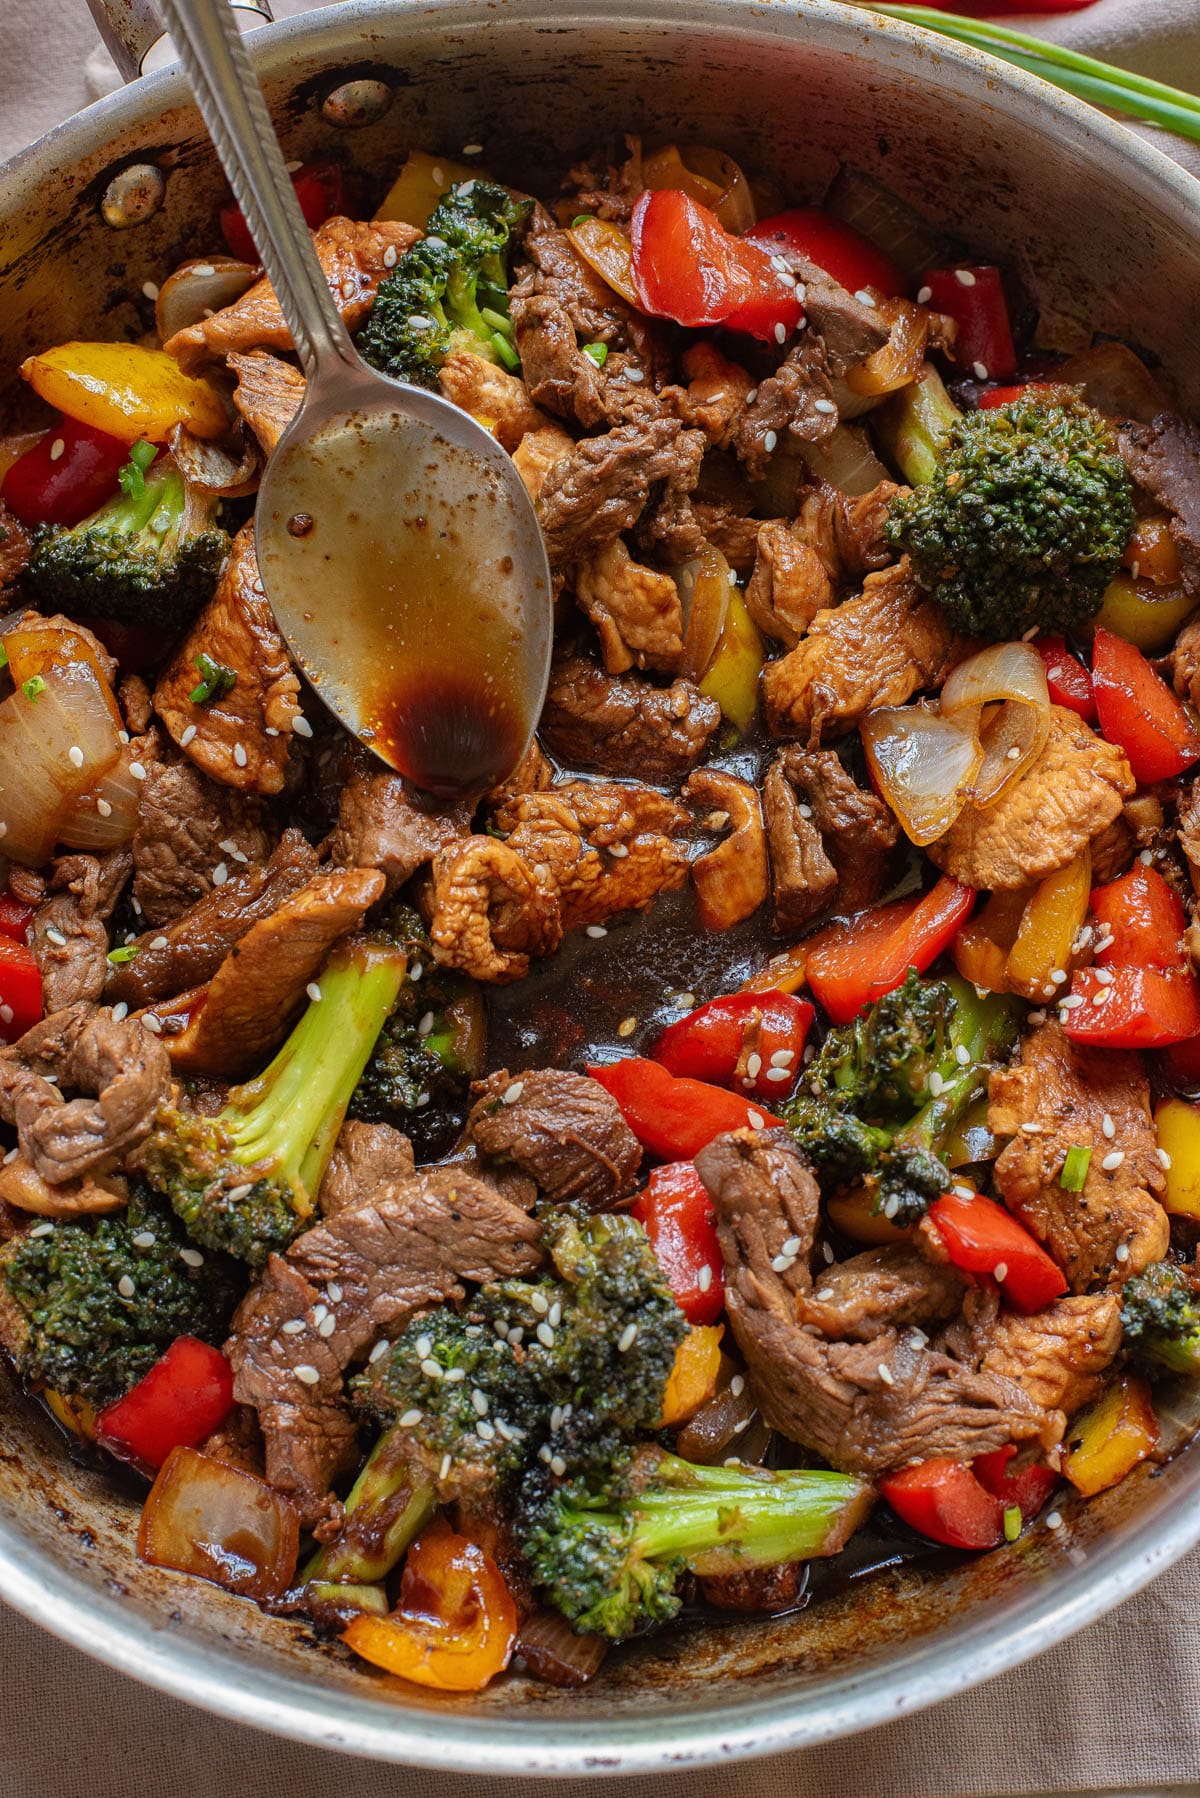 Chicken and steak with vegetables in a stir fry sauce.